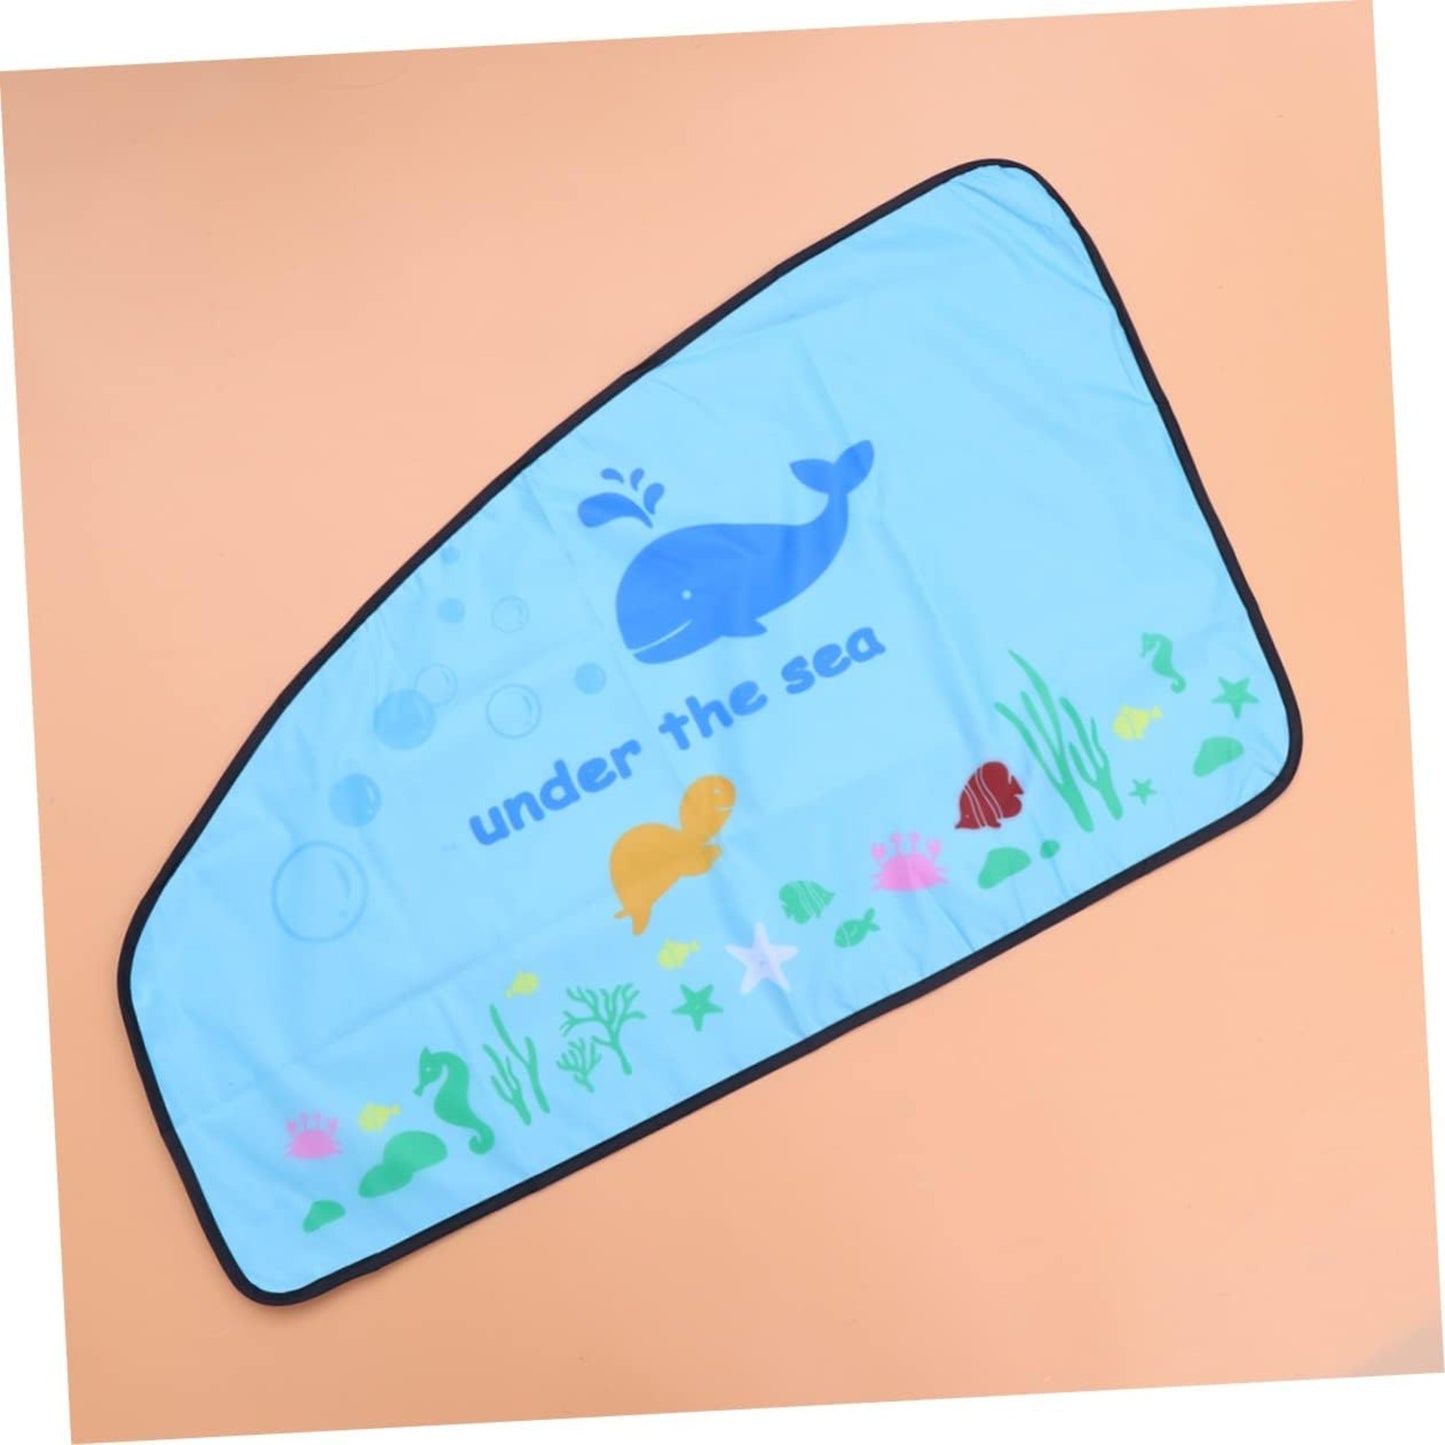 Cartoon Magnetic Car Window Sun Shade: Protect Your Car Interior from Sun with Fun and Easy Window Shade